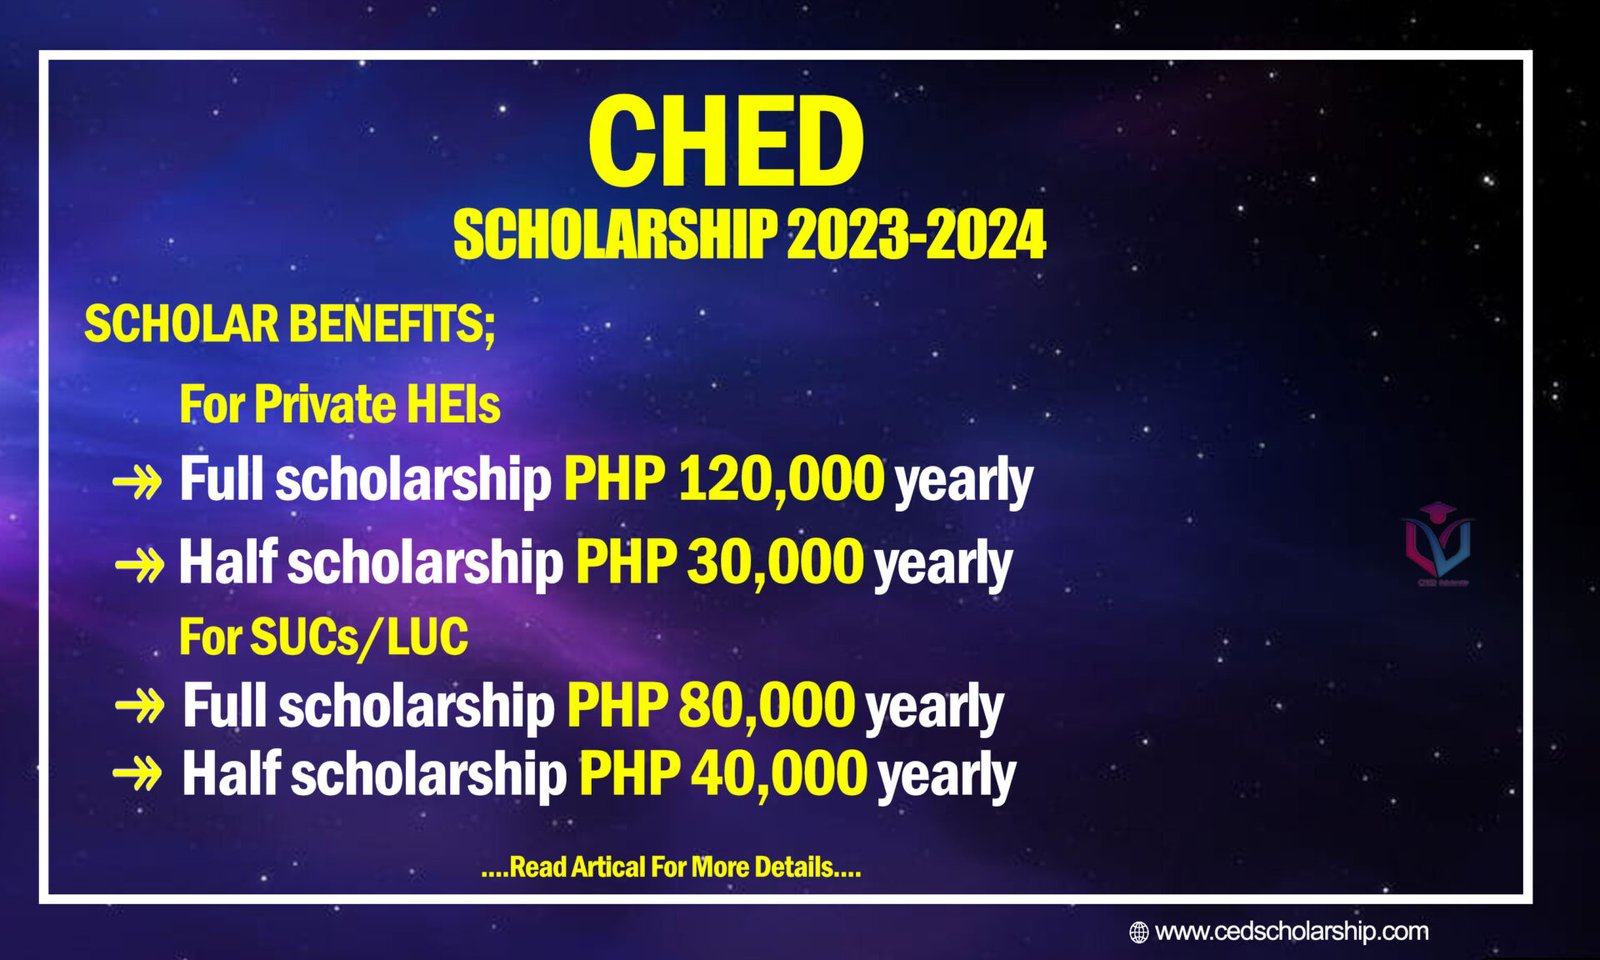 CHED Scholarship Open TO APPLY 2023-2024